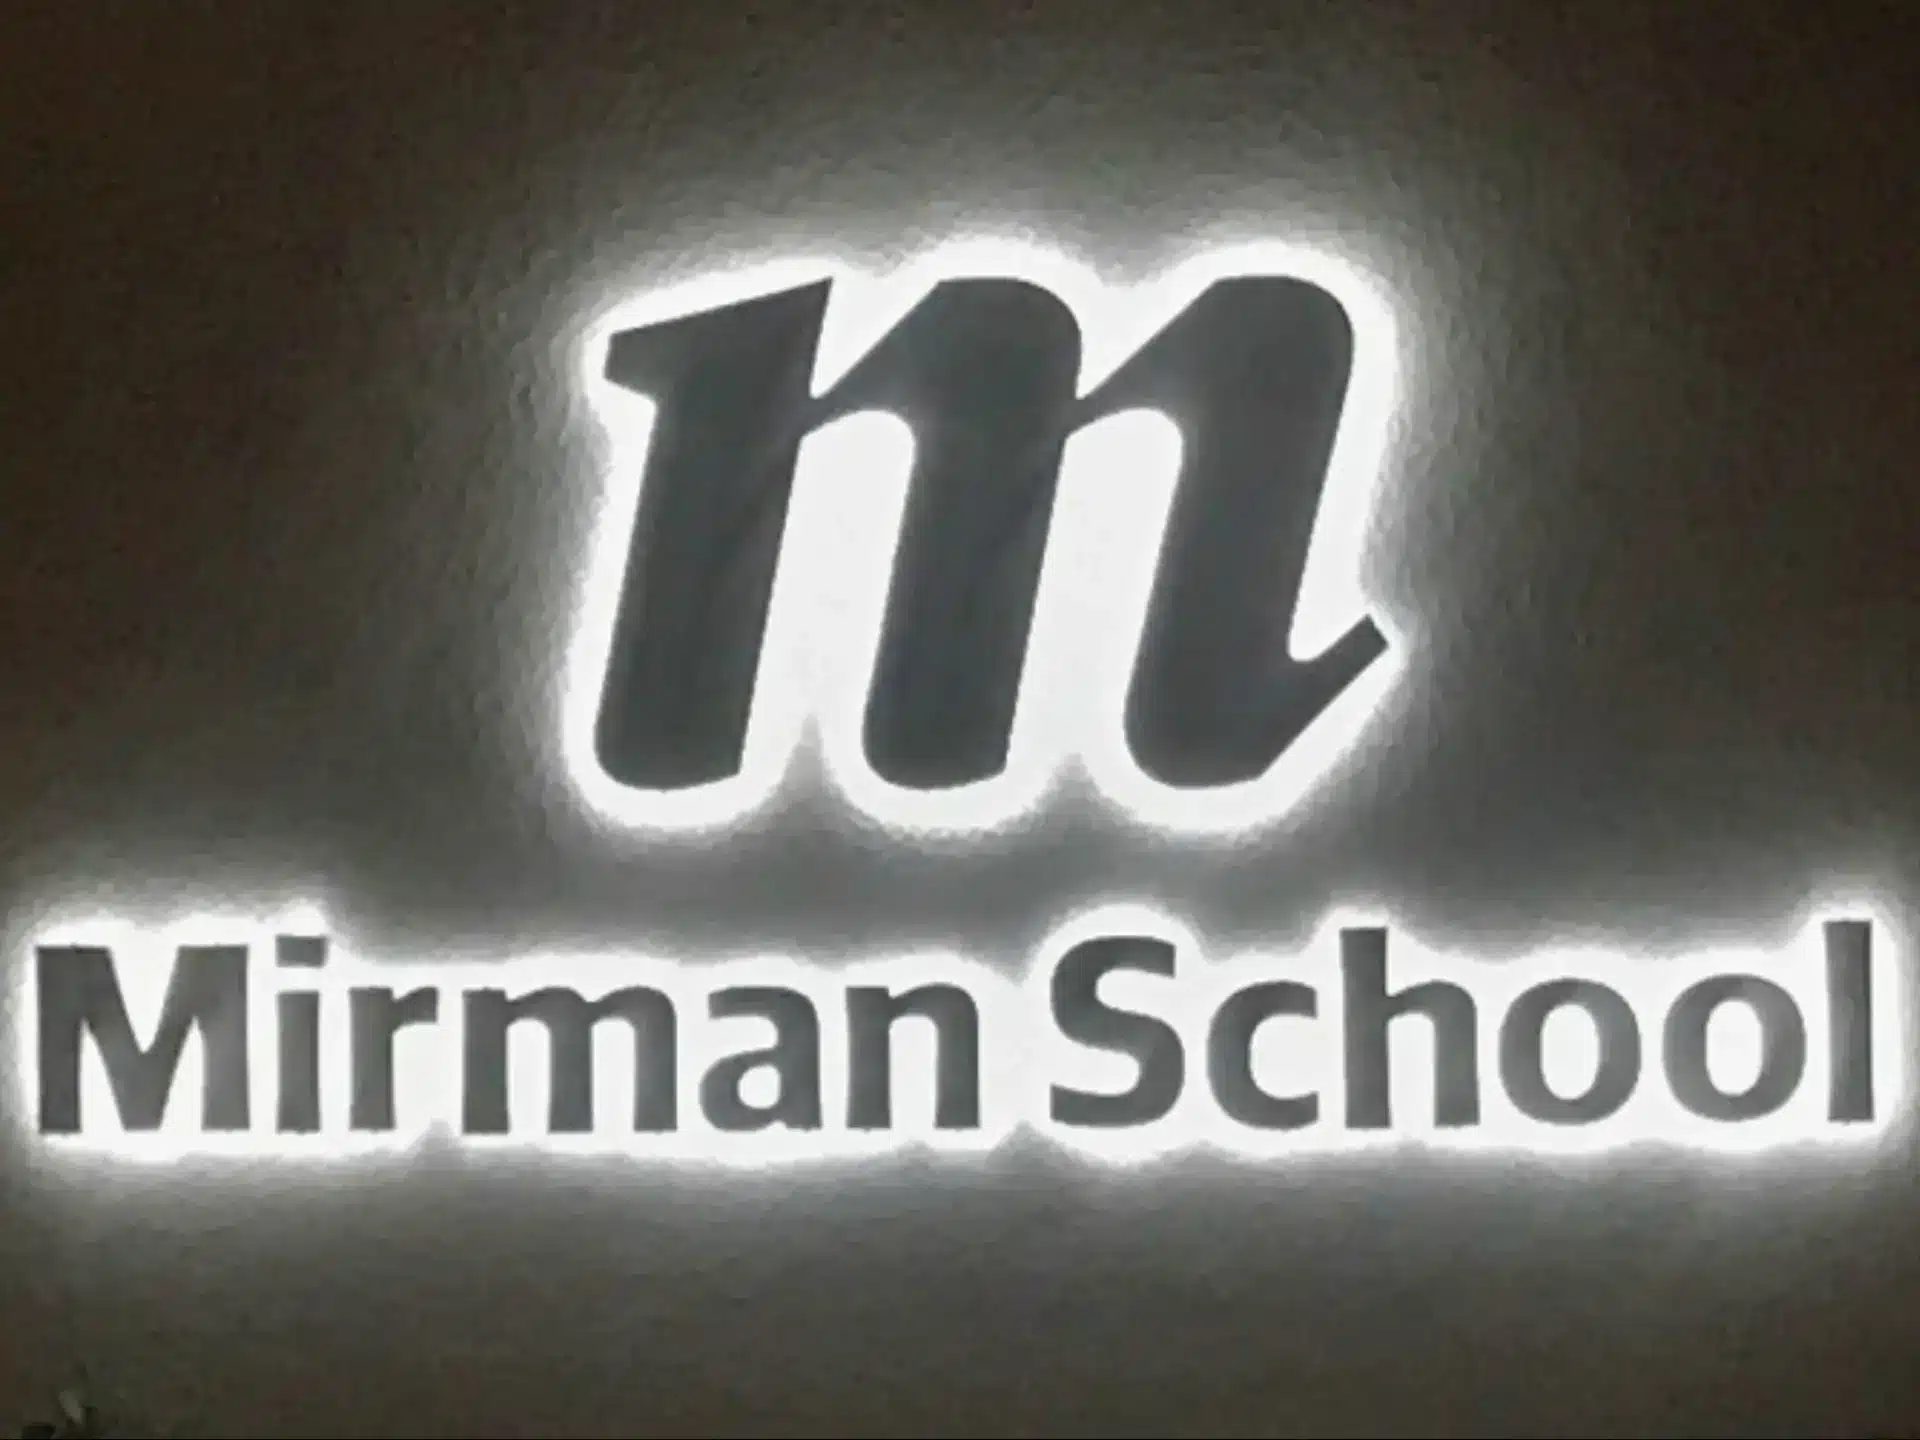 Brushed Aluminum Reverse Lit Channel Letters Mirman School Sign at Night